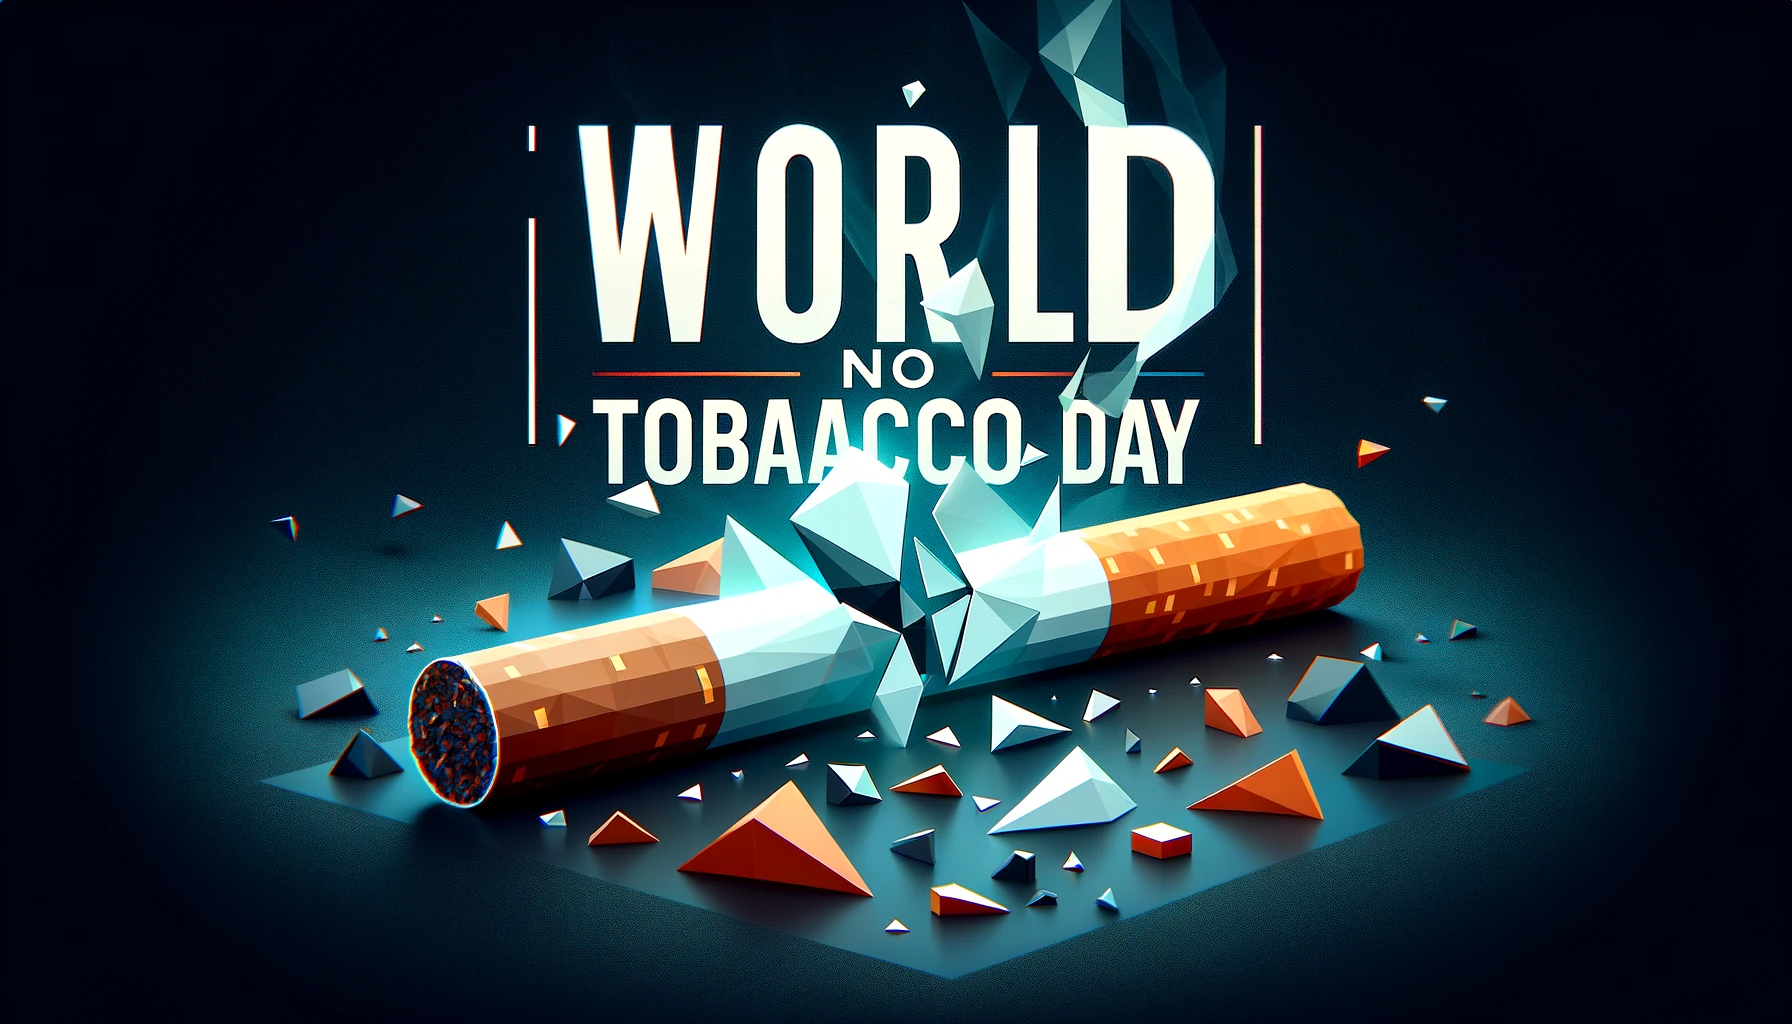 Encouraging World No Tobacco Day Messages for Smokers